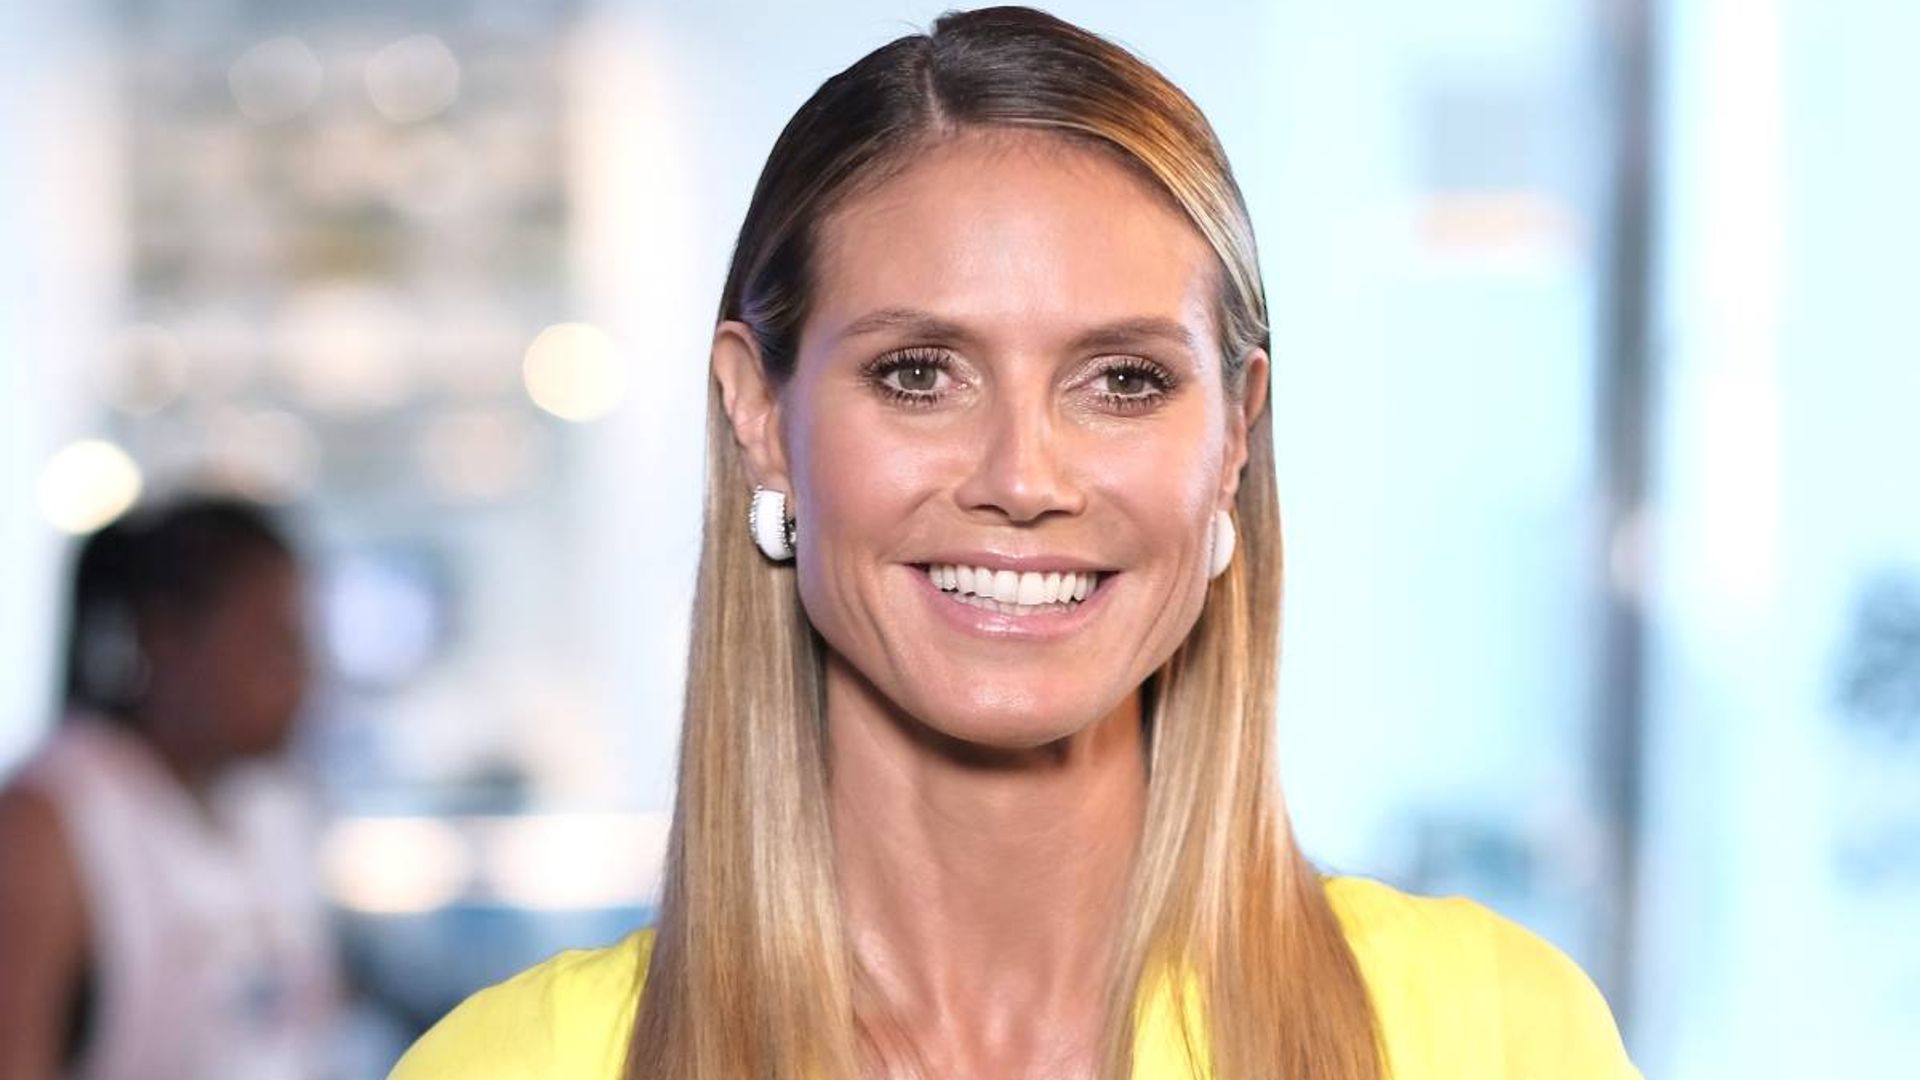 Heidi Klum gets fans talking with bold hair transformation - and she looks unrecognisable!